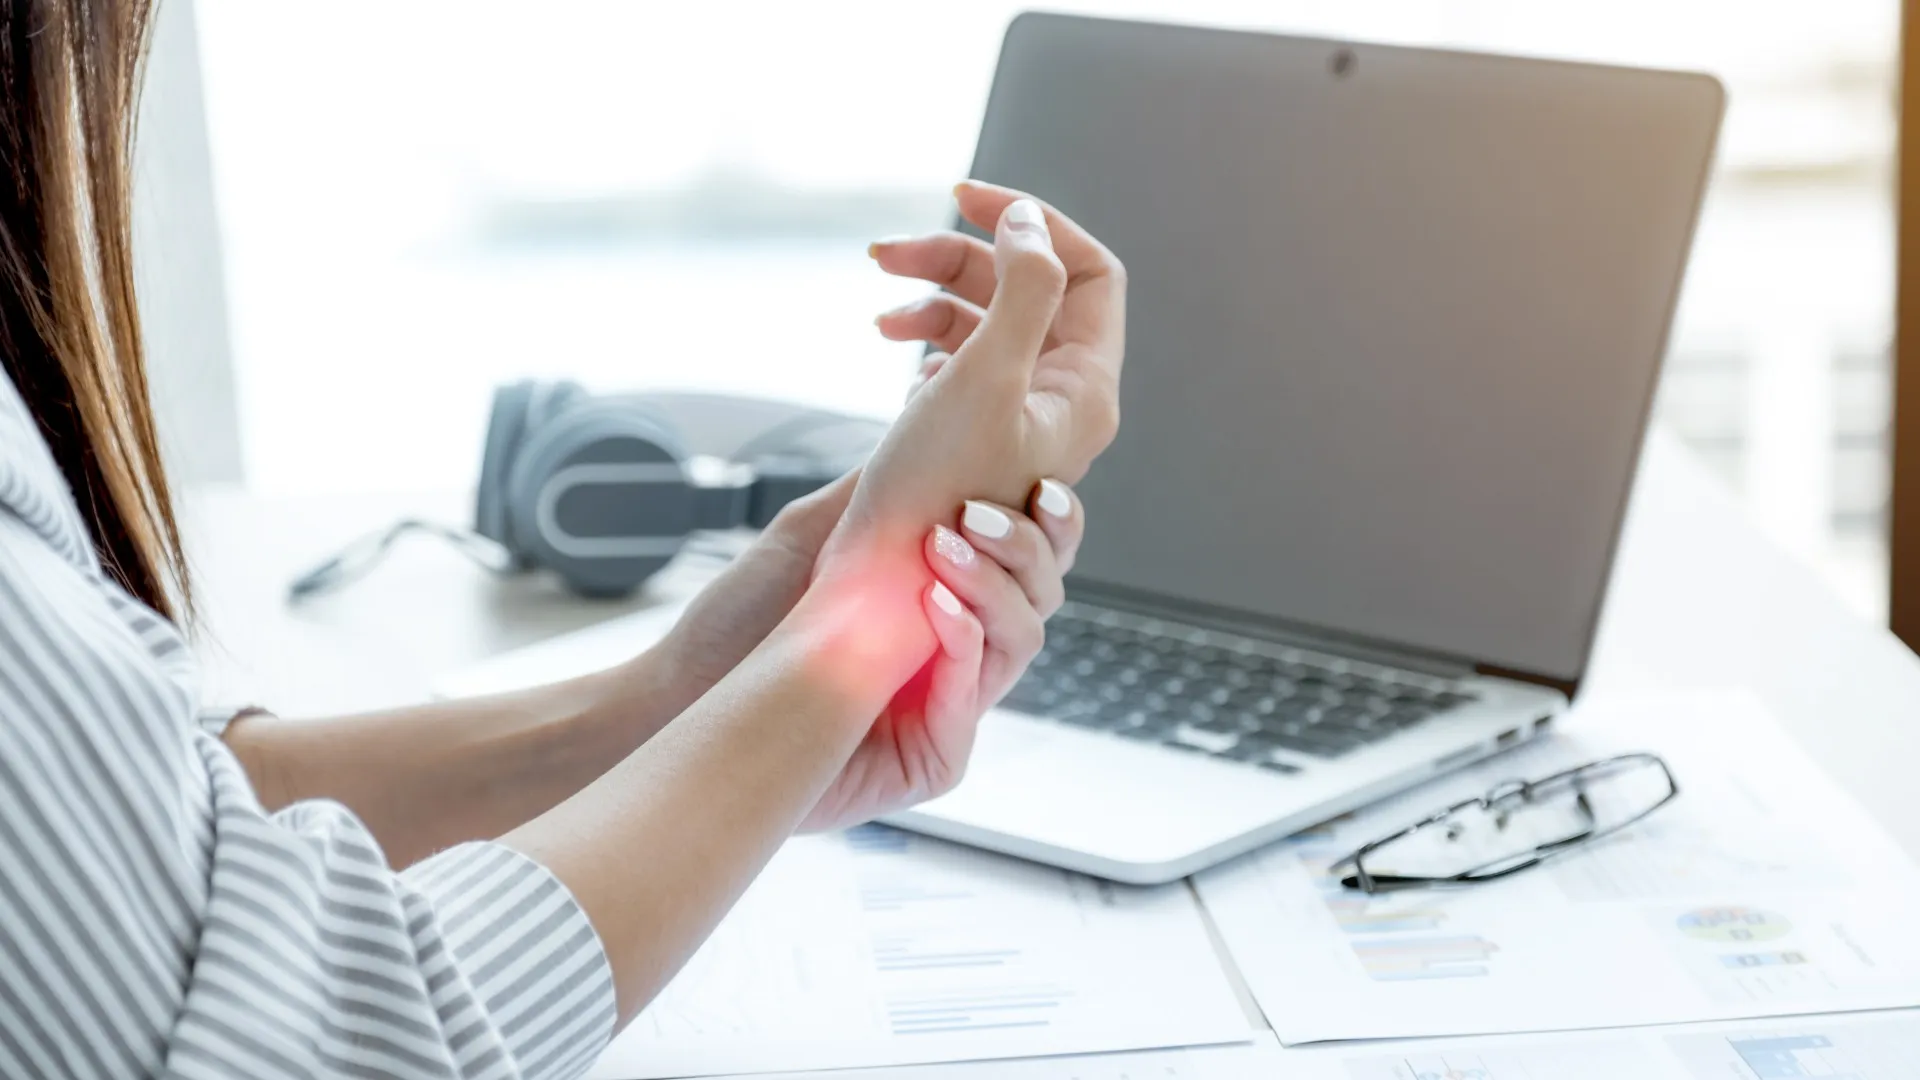 Carpal Tunnel Syndrome: Is It Just Due to Repetitive Motion?